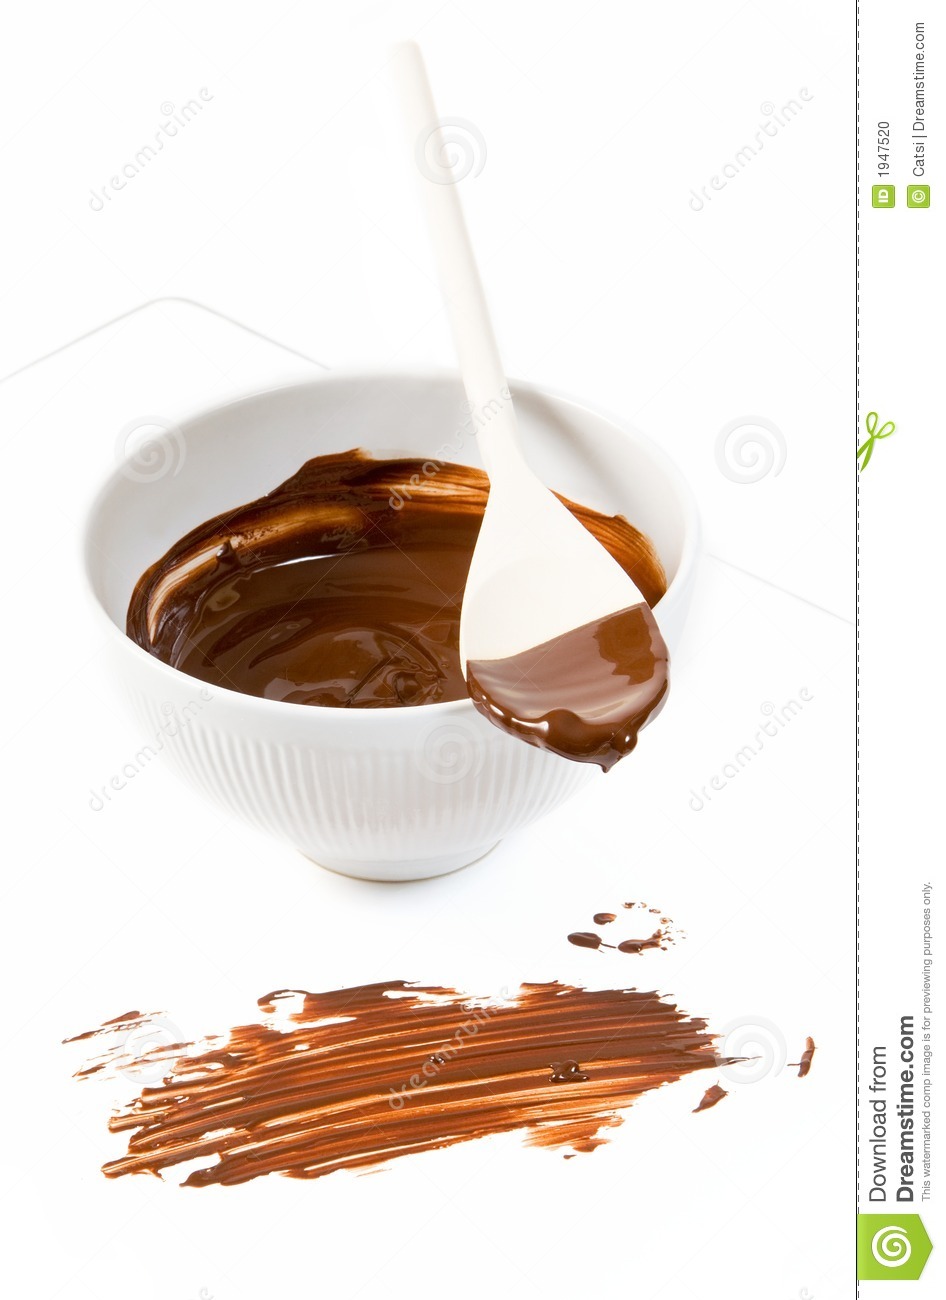 Melted Dark Chocolate Dripping From The Spoon Stock Photo   Image